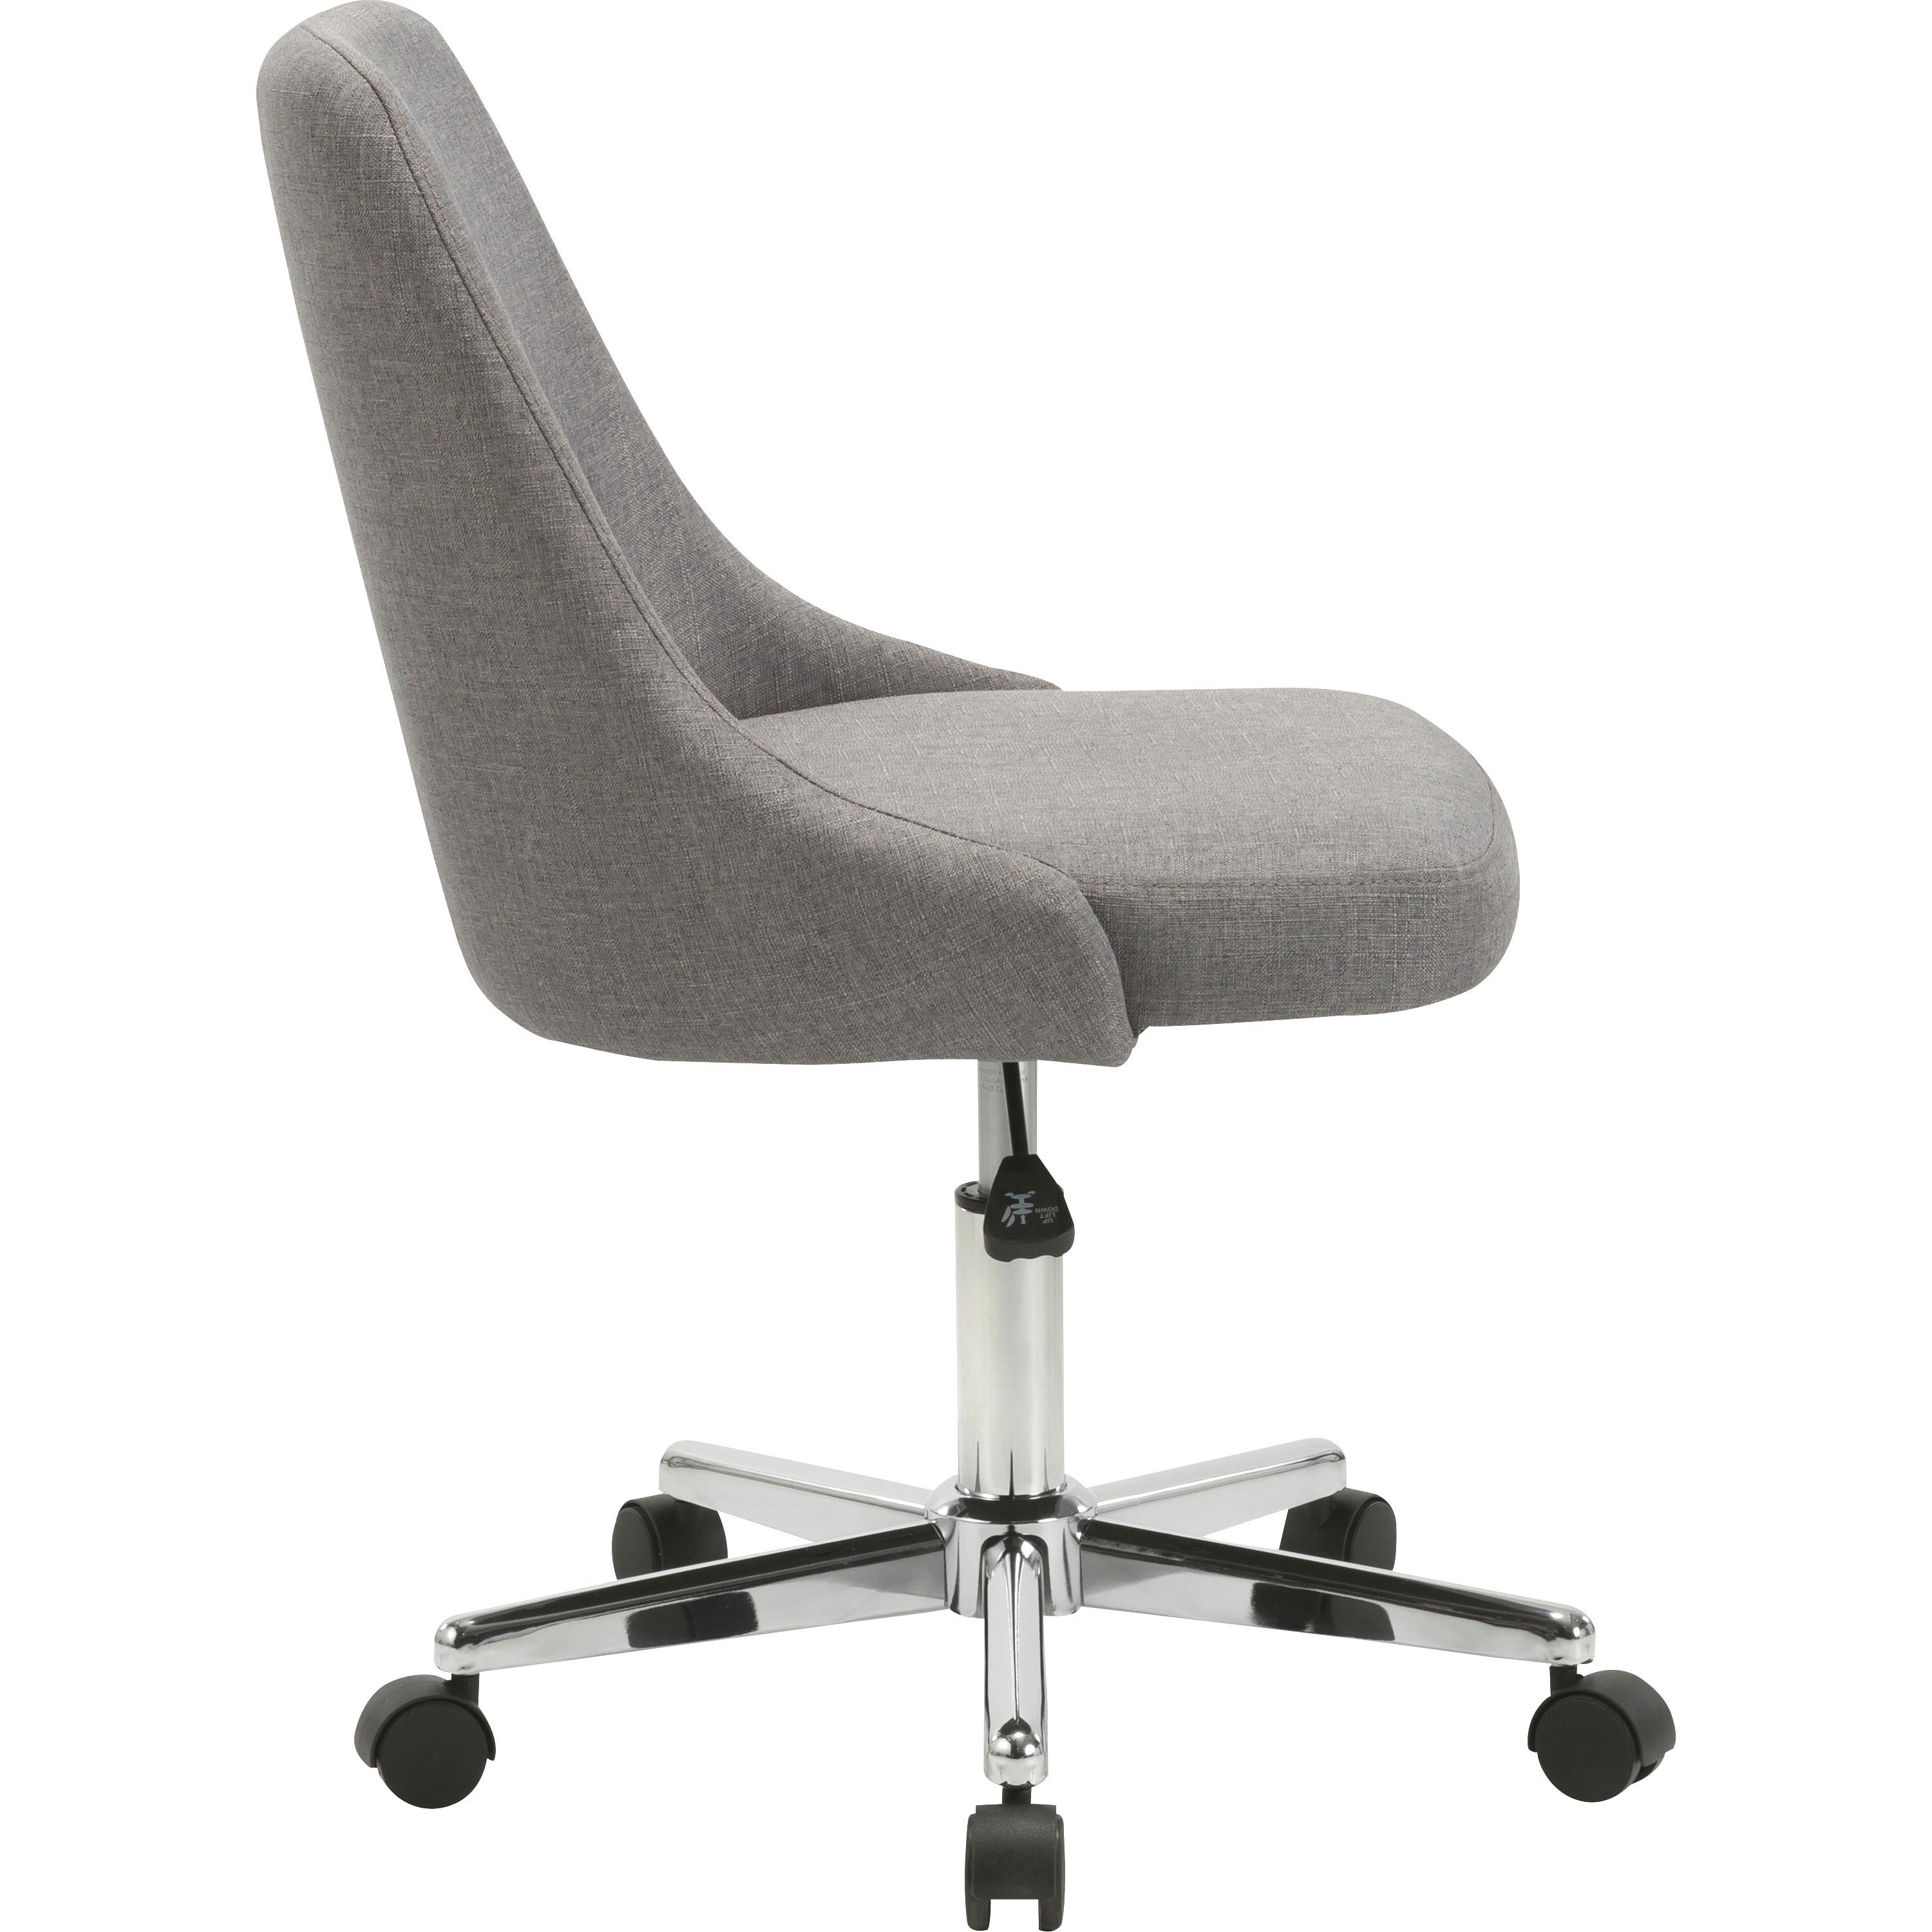 Lorell Resimercial Low-back Task Chair with Arms - 22.5" x 24.4"31.5" - Material: Fabric - Finish: Gray - 5